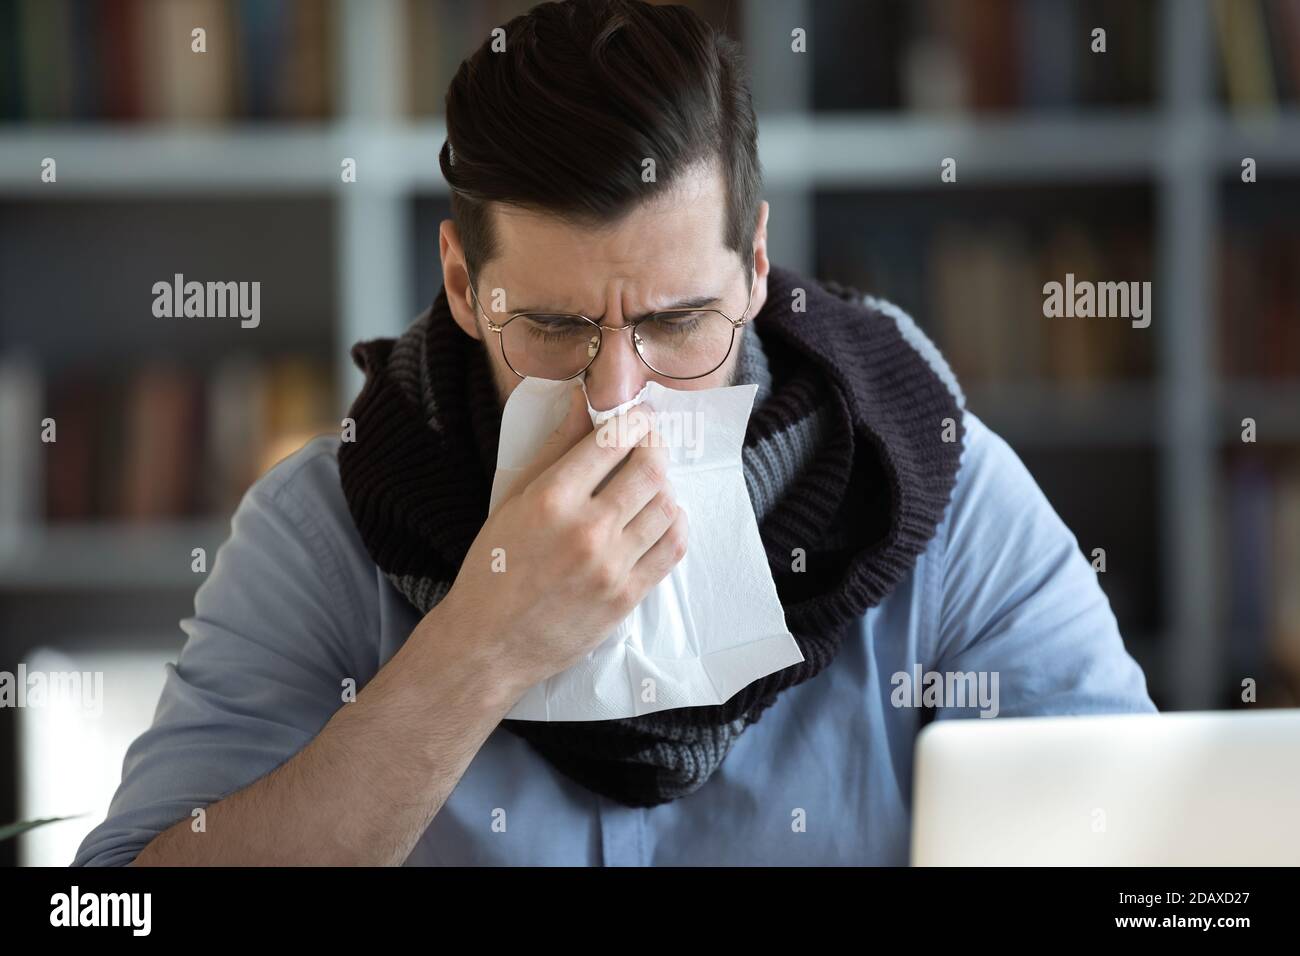 Sick office employee blowing running nose in paper tissue Stock Photo